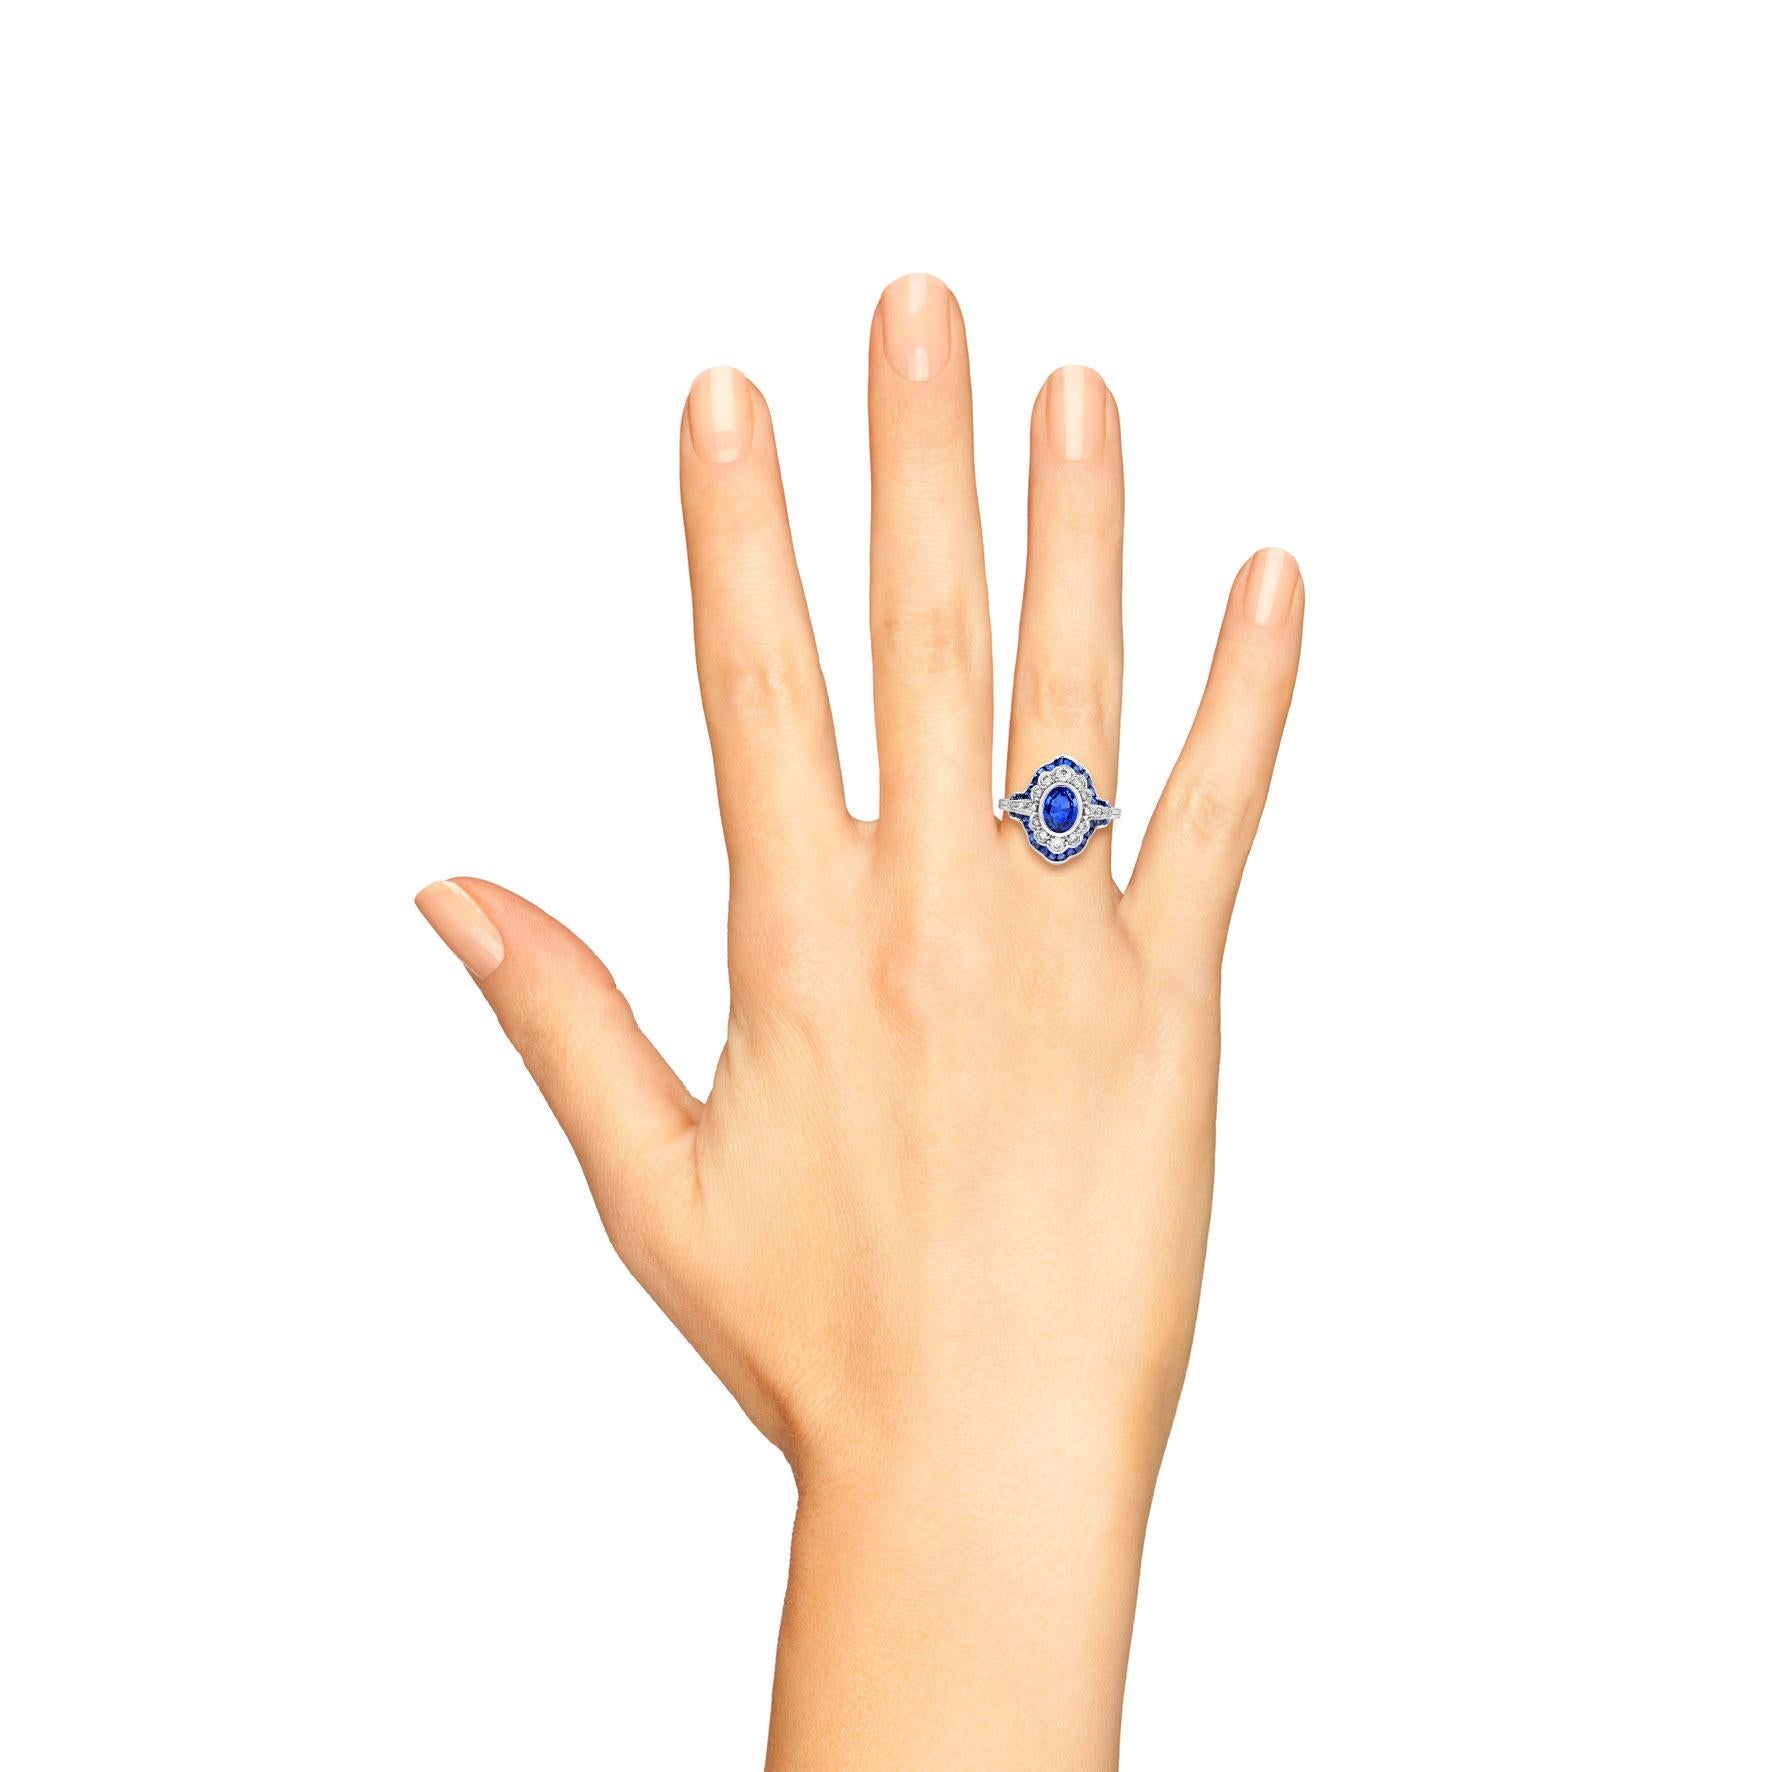 Charming Art Deco style engagement  ring featuring a 1.6 carat (approx) Ceylon sapphire center surrounded by total of .45 diamonds and French cut sapphire  in 18k white gold. The milgrain adds to the vintage style. This beautiful piece would make